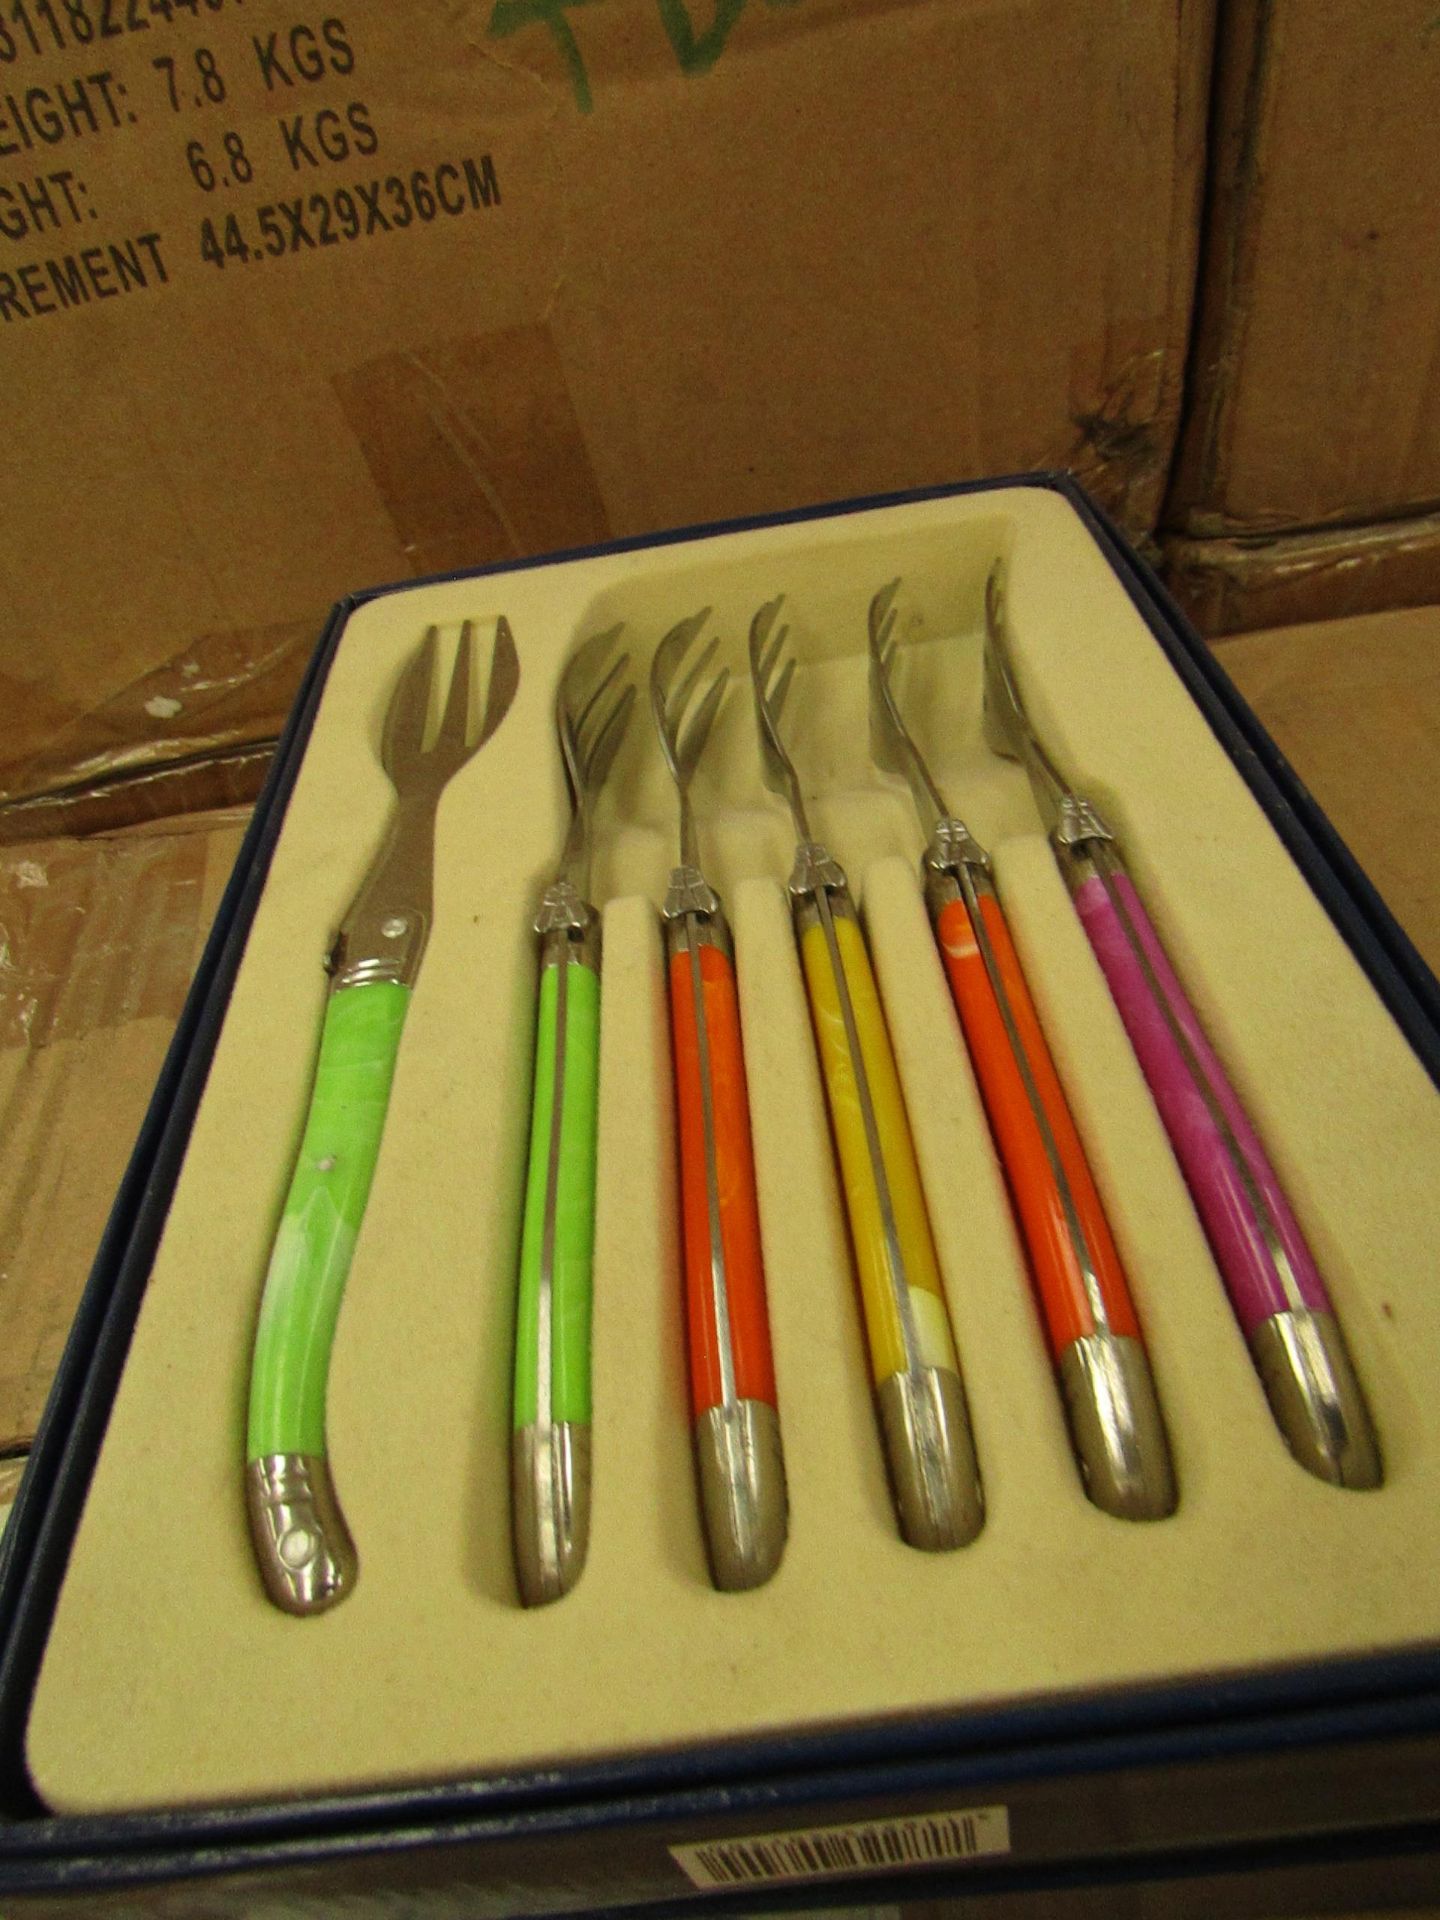 48x Laguiole - Cake Forks (6 Forks Per Box) Blue & Green - Unused & Boxed.